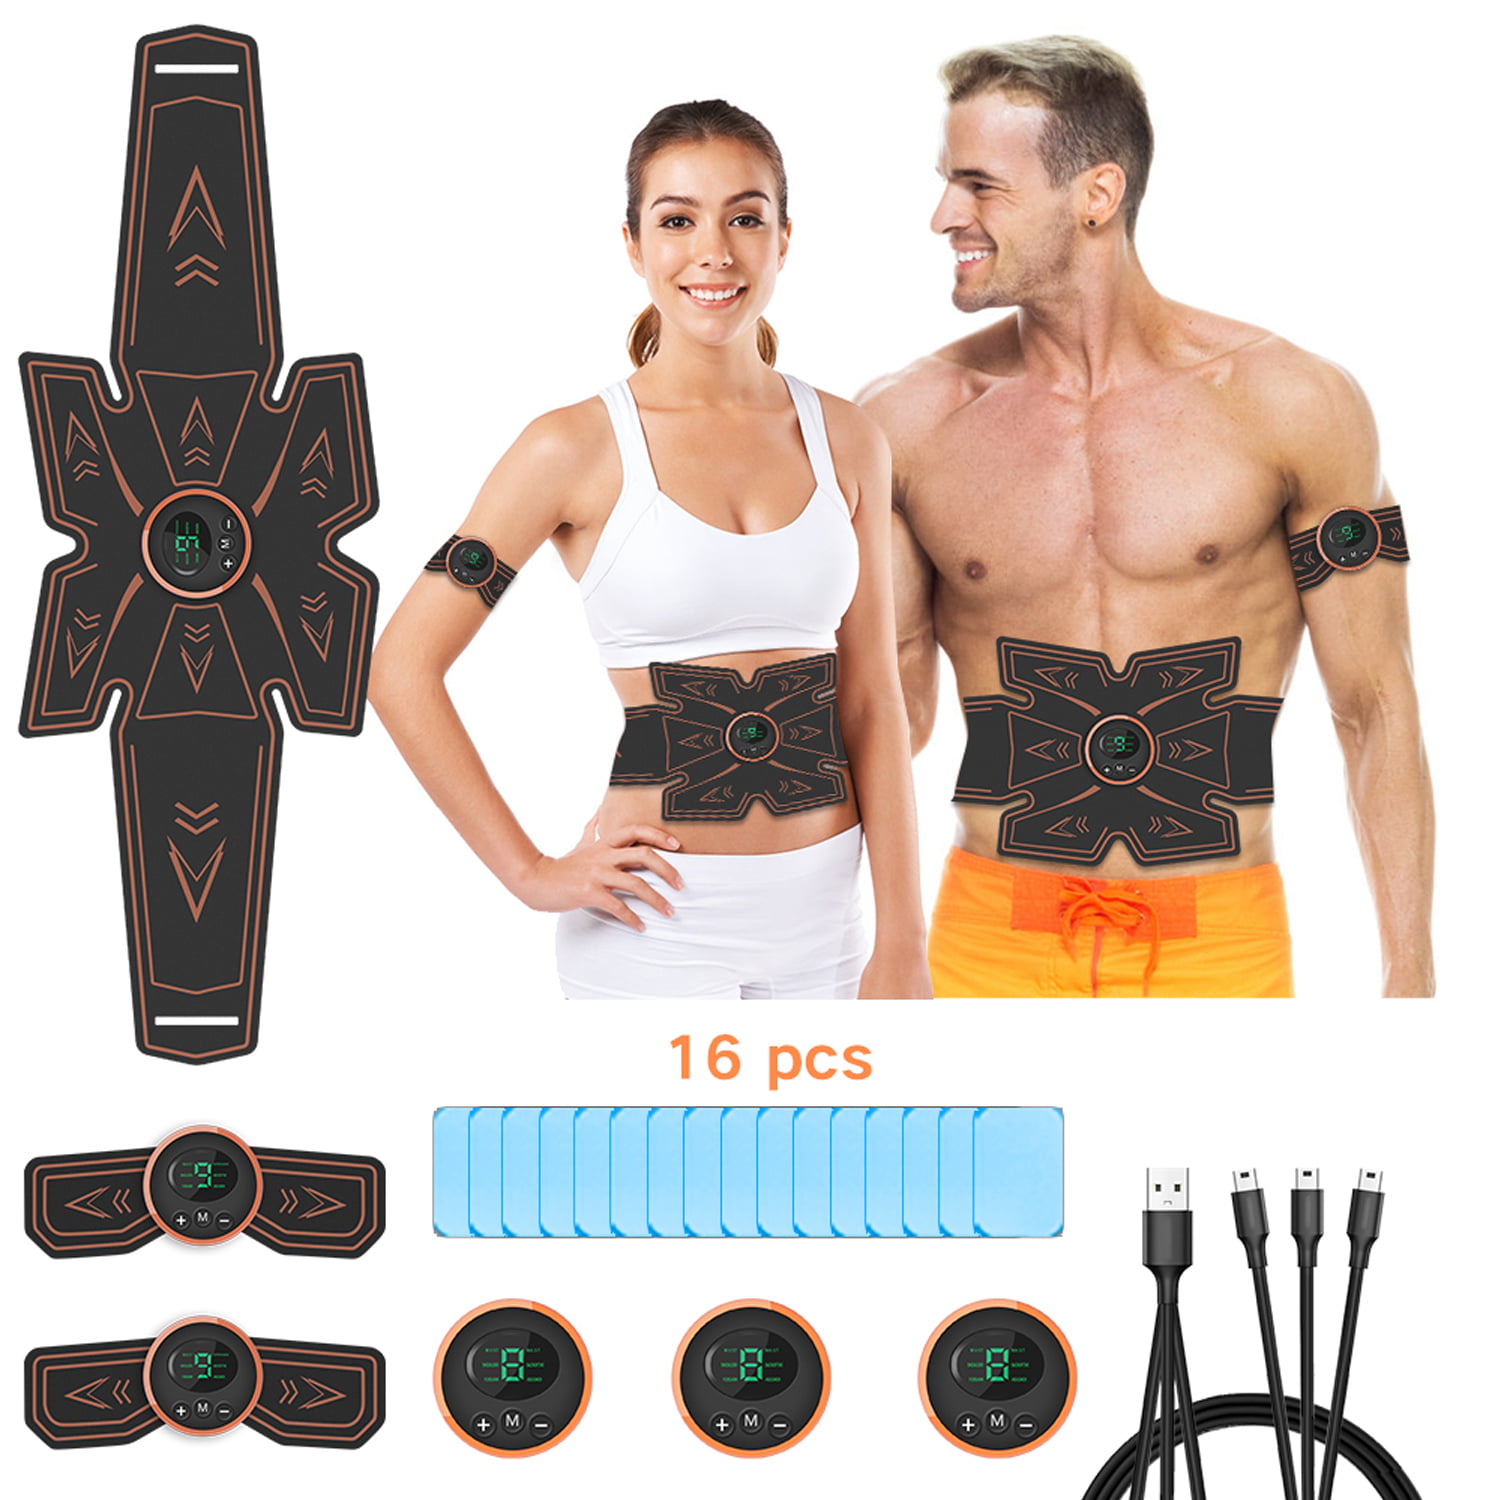 Total Abs Fat Reducing System For Strong Abs Muscles Belts Vest EMS Stimulator U 